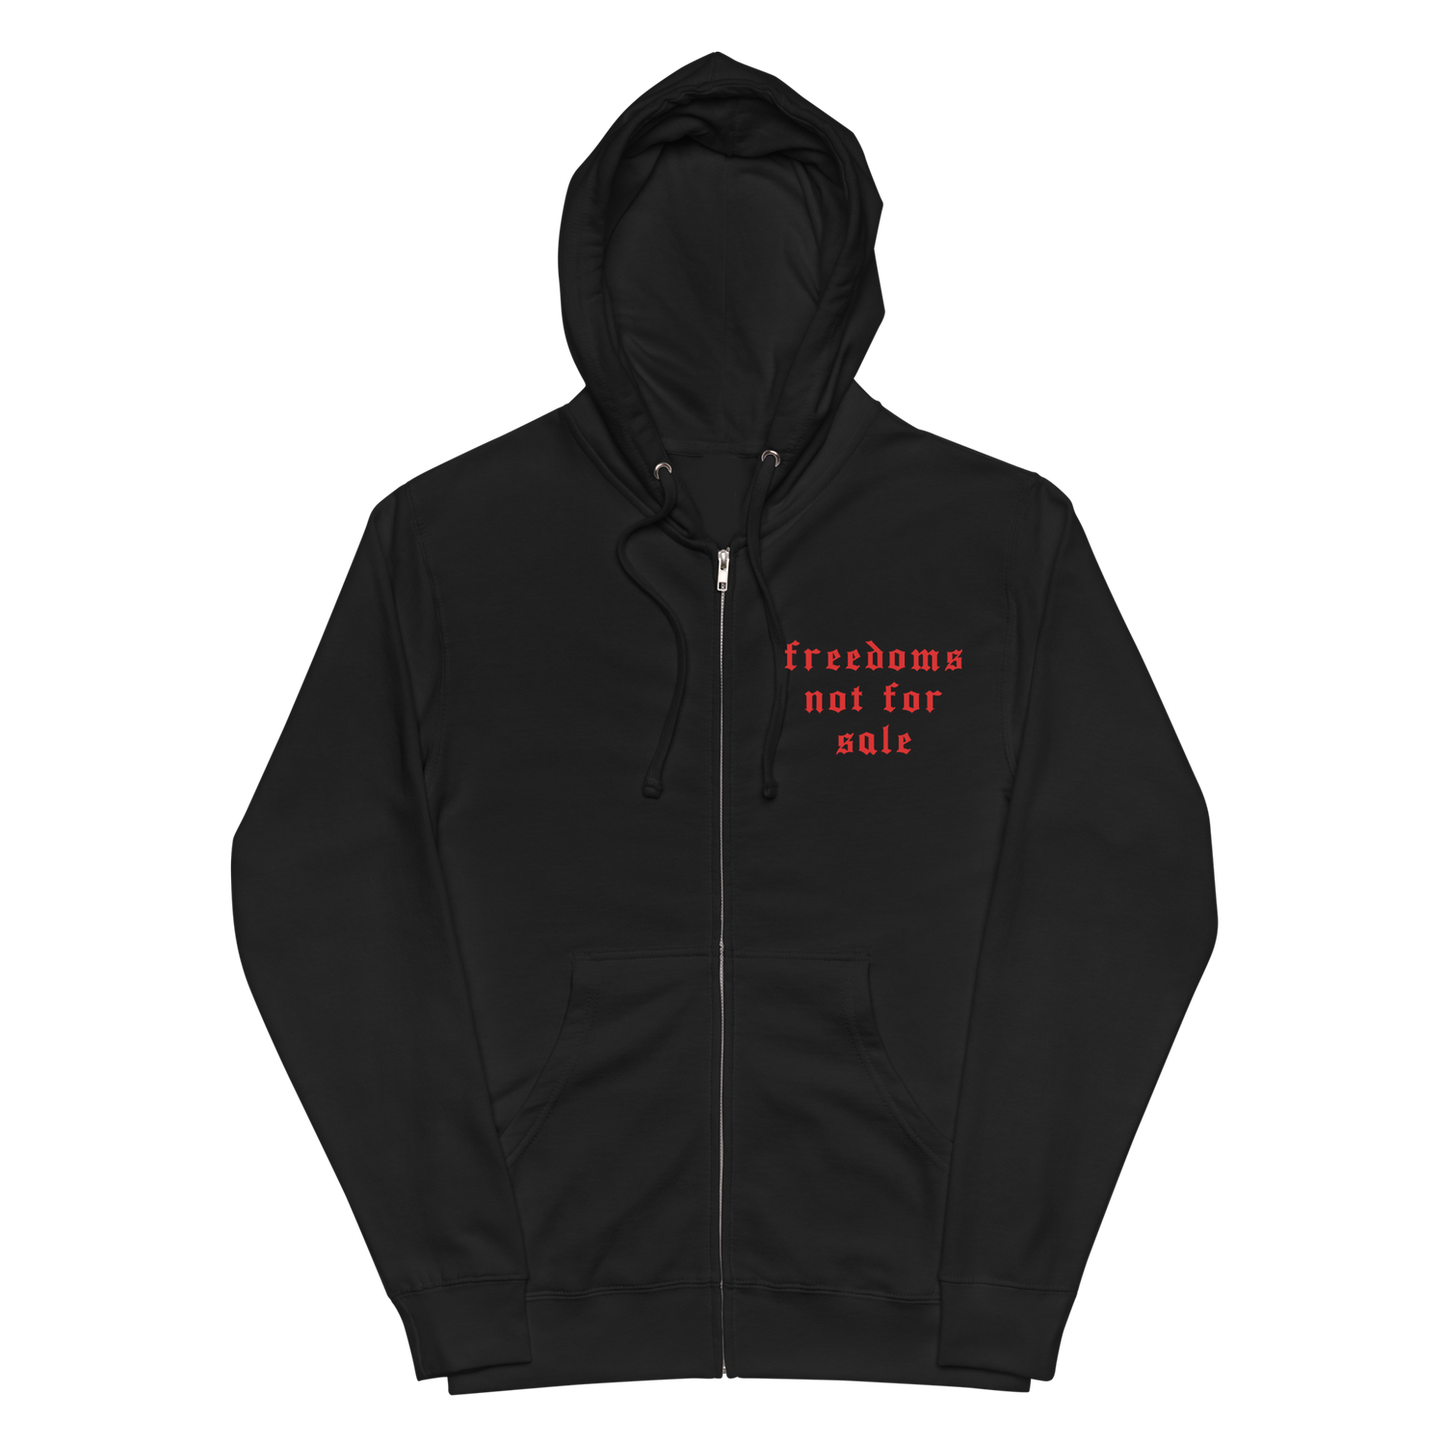 "Freedoms Not For Sale" Zip-up Hoodie